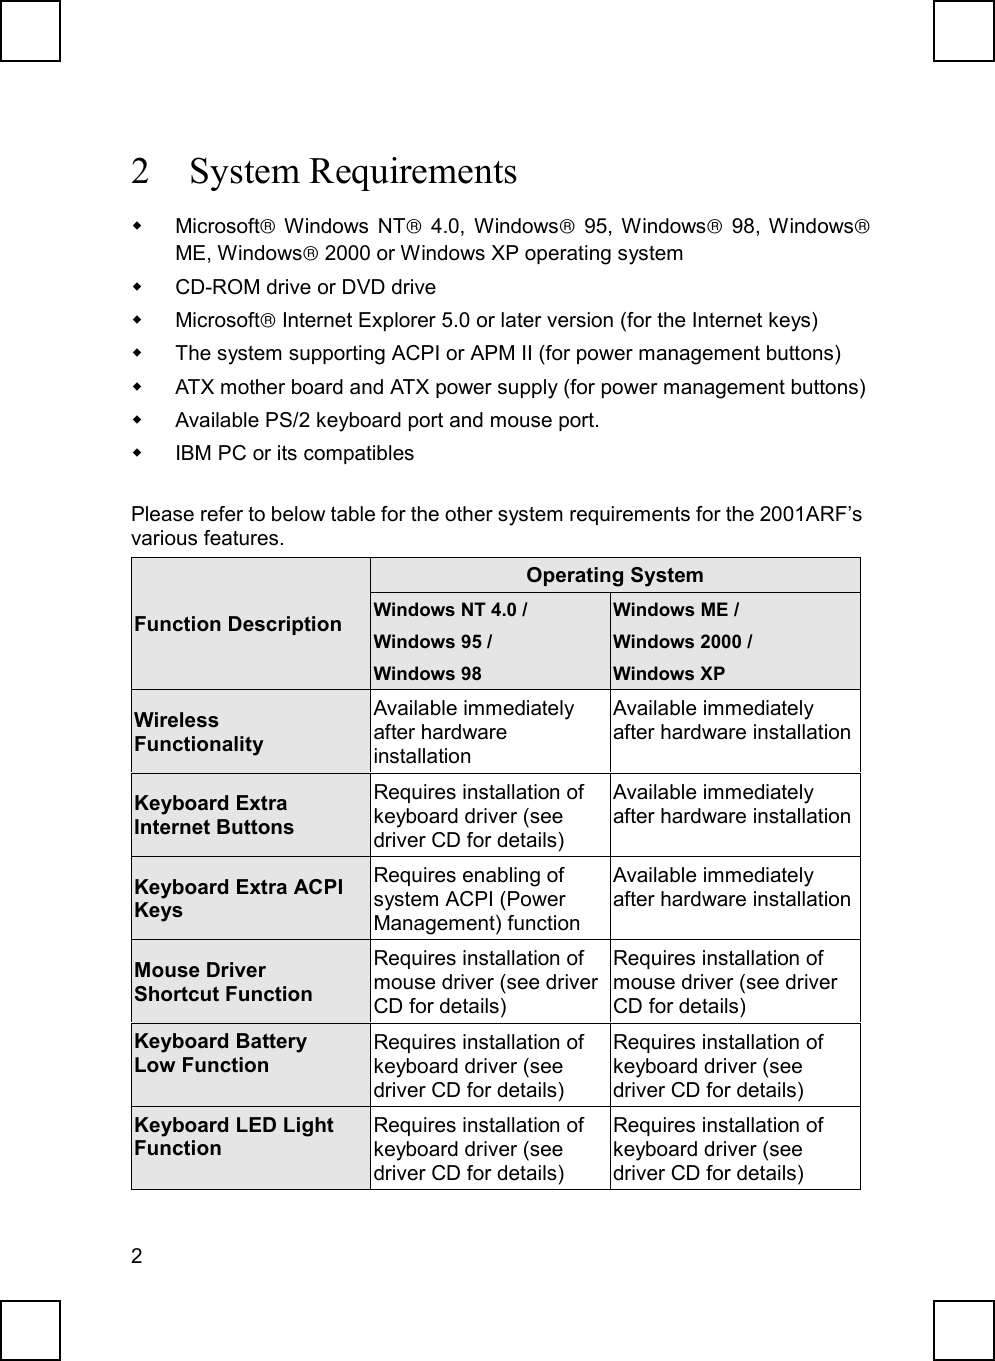 22 System Requirements Microsoft Windows NT 4.0, Windows 95, Windows 98, WindowsME, Windows 2000 or Windows XP operating system  CD-ROM drive or DVD drive Microsoft Internet Explorer 5.0 or later version (for the Internet keys)  The system supporting ACPI or APM II (for power management buttons)  ATX mother board and ATX power supply (for power management buttons)  Available PS/2 keyboard port and mouse port.  IBM PC or its compatiblesPlease refer to below table for the other system requirements for the 2001ARF’svarious features.Operating SystemFunction Description Windows NT 4.0 /Windows 95 /Windows 98Windows ME /Windows 2000 /Windows XPWirelessFunctionalityAvailable immediatelyafter hardwareinstallationAvailable immediatelyafter hardware installationKeyboard ExtraInternet ButtonsRequires installation ofkeyboard driver (seedriver CD for details)Available immediatelyafter hardware installationKeyboard Extra ACPIKeysRequires enabling ofsystem ACPI (PowerManagement) functionAvailable immediatelyafter hardware installationMouse DriverShortcut FunctionRequires installation ofmouse driver (see driverCD for details)Requires installation ofmouse driver (see driverCD for details)Keyboard BatteryLow FunctionRequires installation ofkeyboard driver (seedriver CD for details)Requires installation ofkeyboard driver (seedriver CD for details)Keyboard LED LightFunctionRequires installation ofkeyboard driver (seedriver CD for details)Requires installation ofkeyboard driver (seedriver CD for details)